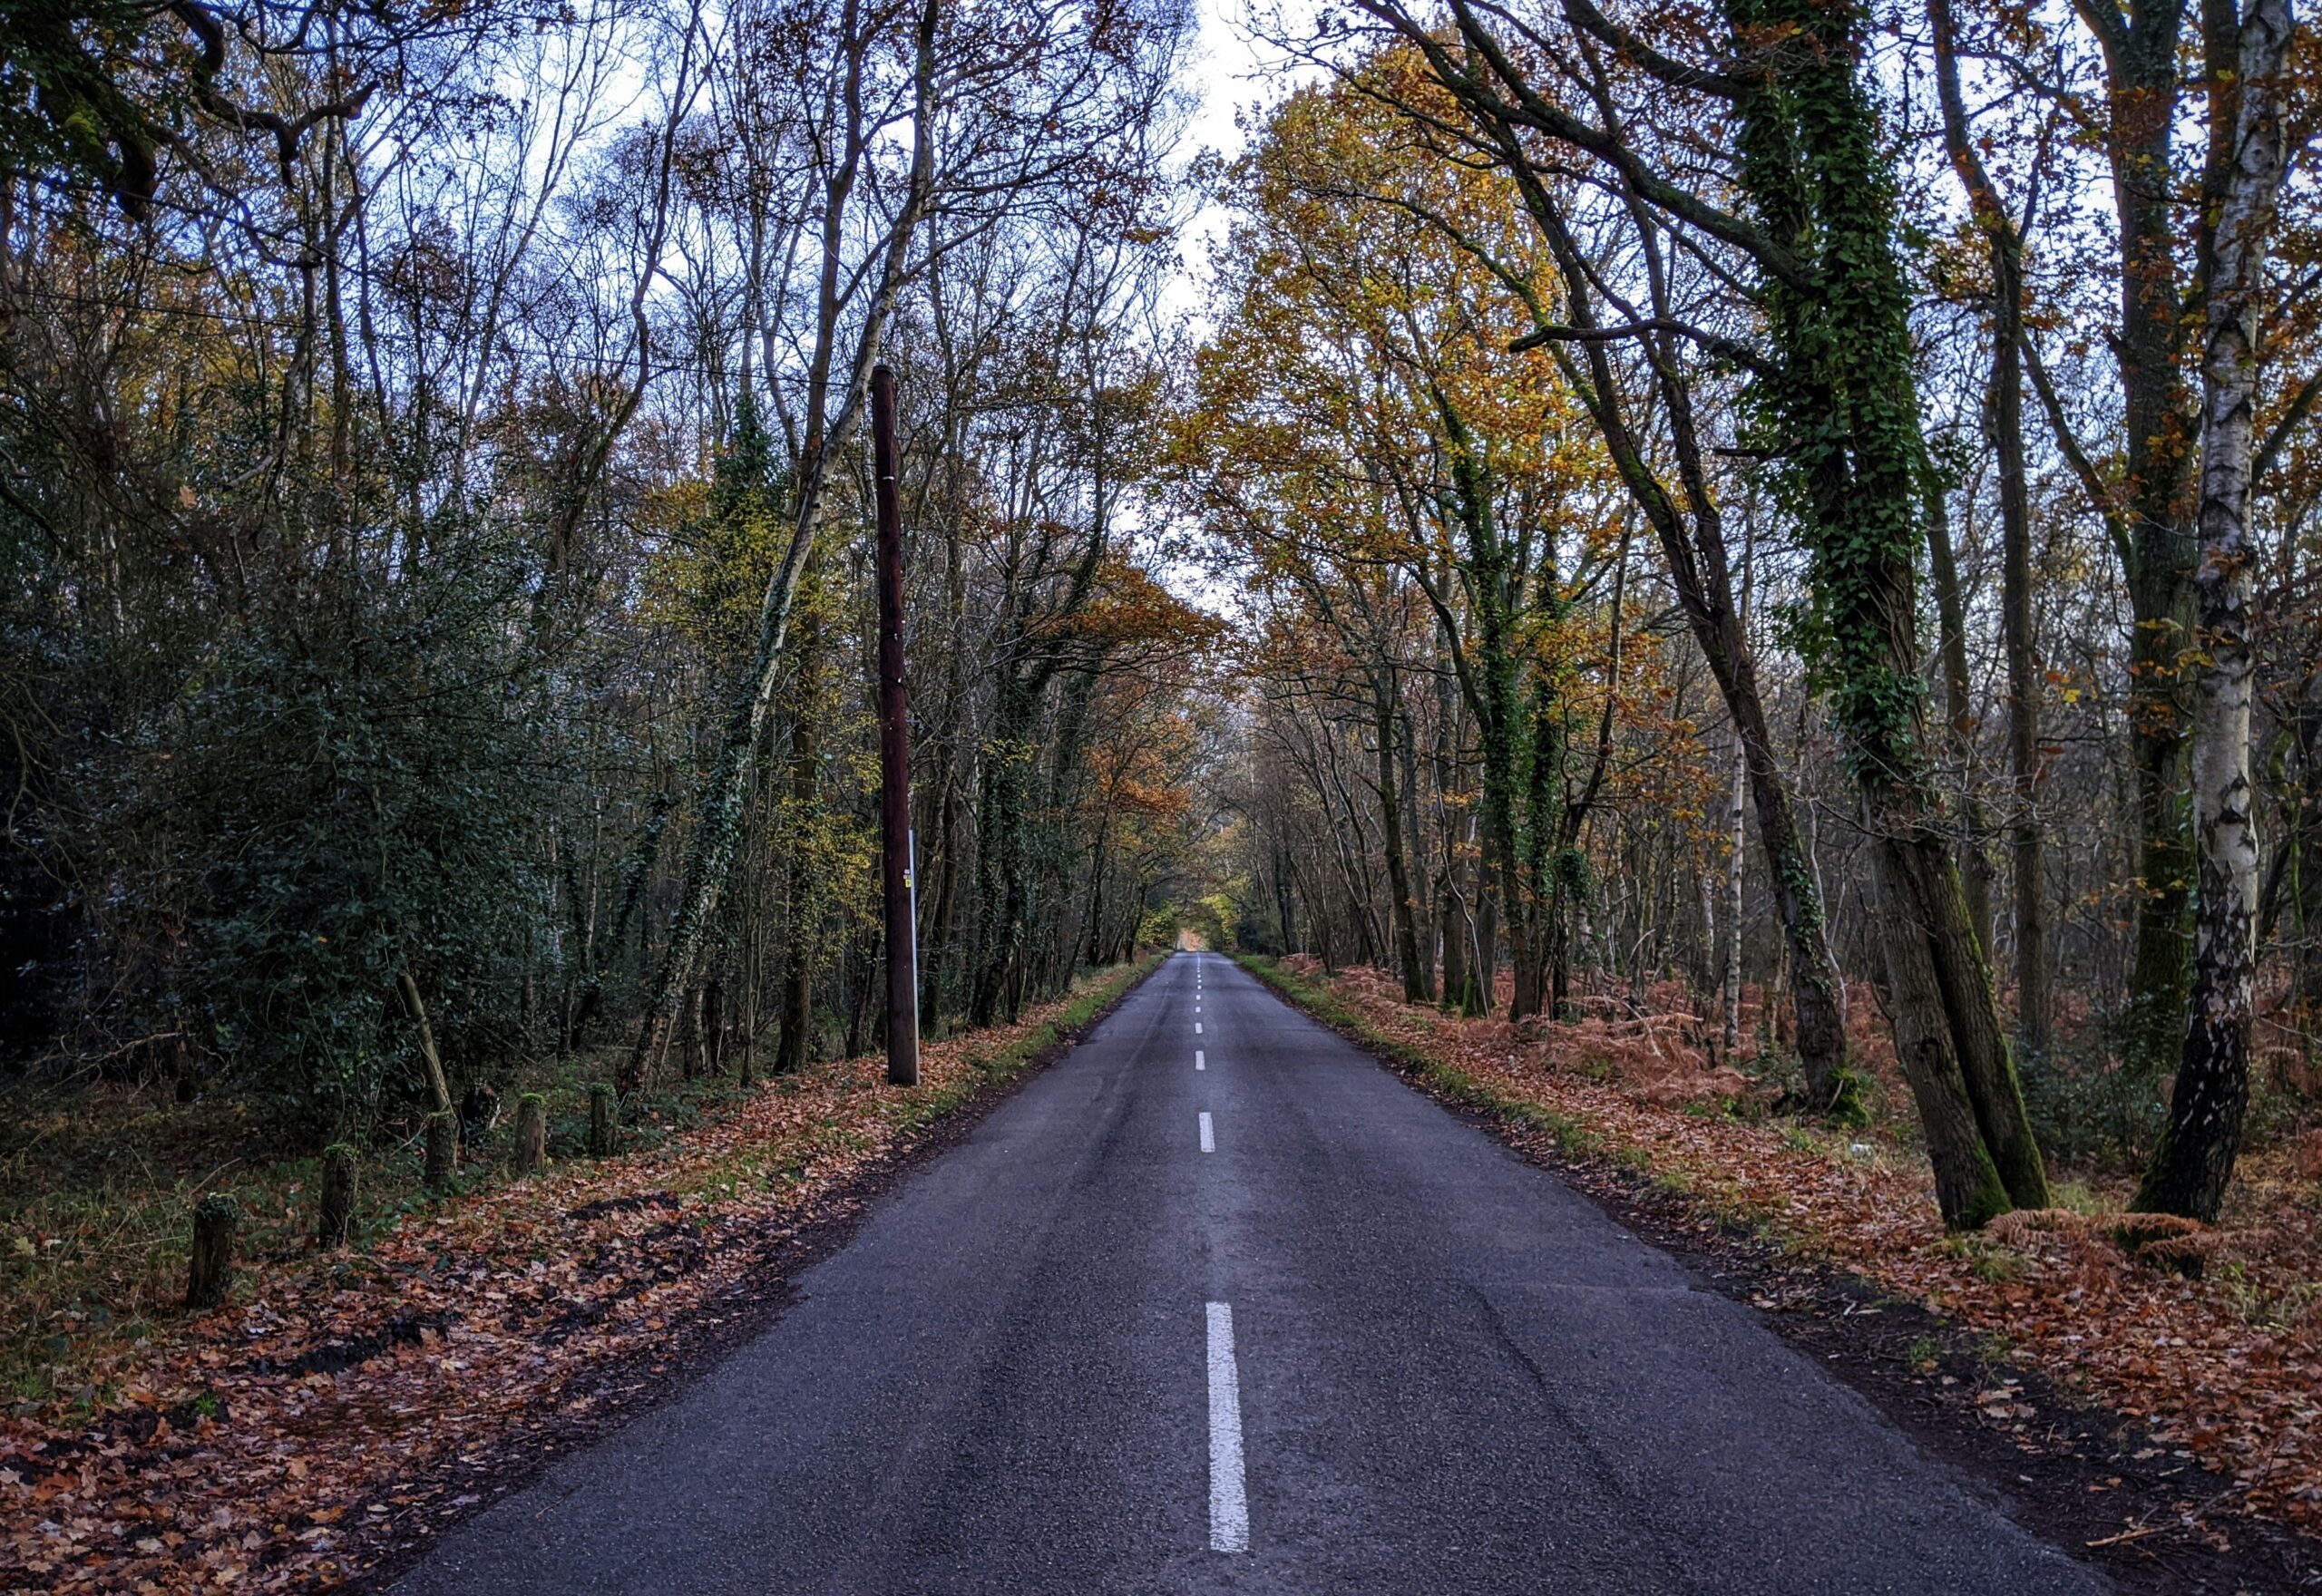 Guildford is a filming location of the series "The Gentlemen" on Netflix. 
pictured: a road in the English countryside during fall 